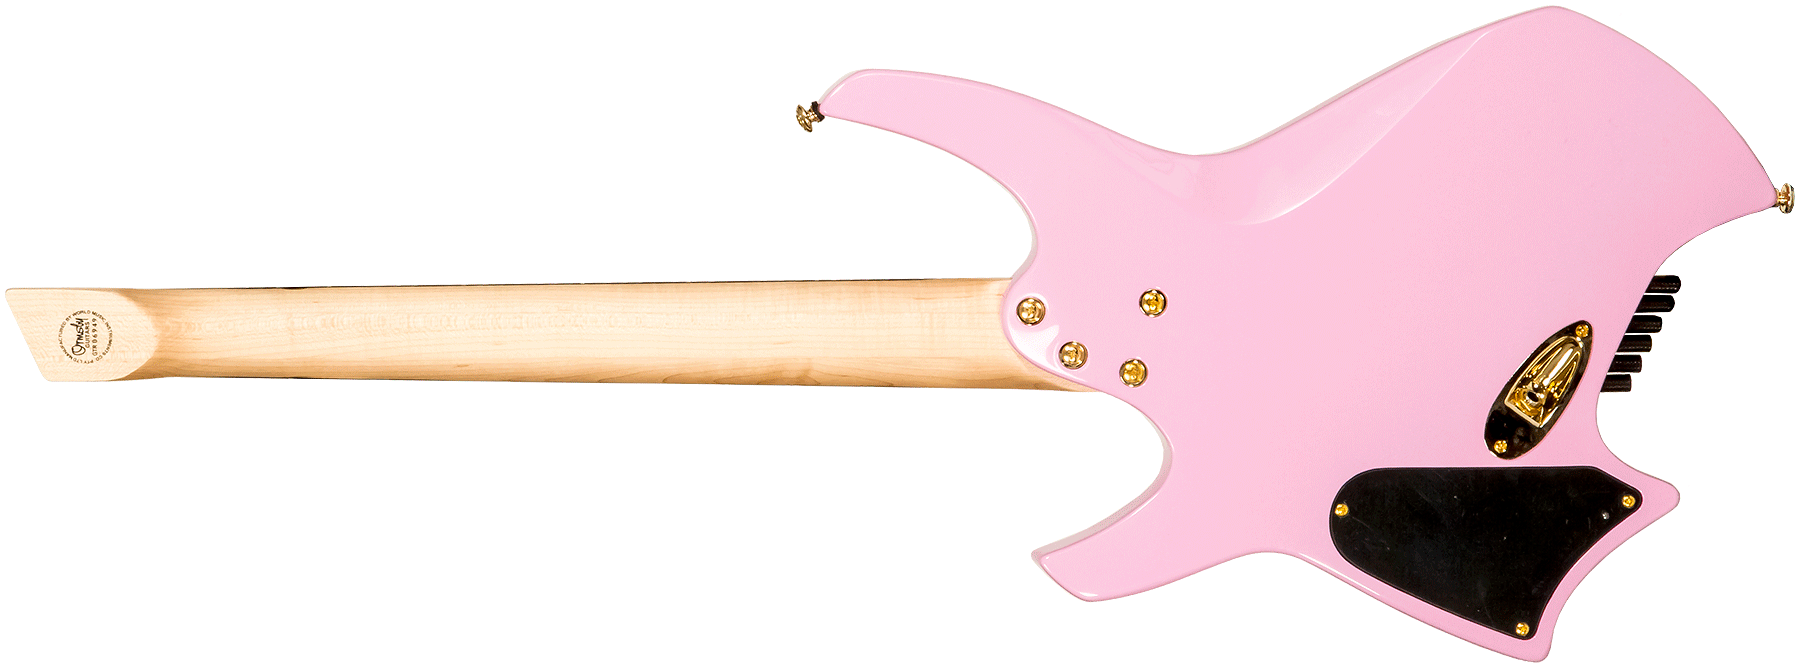 Ormsby Goliath Headless Gtr Run 14c Multiscale 2h Ht Eb - Shell Pink - Guitare Électrique Multi-scale - Variation 7